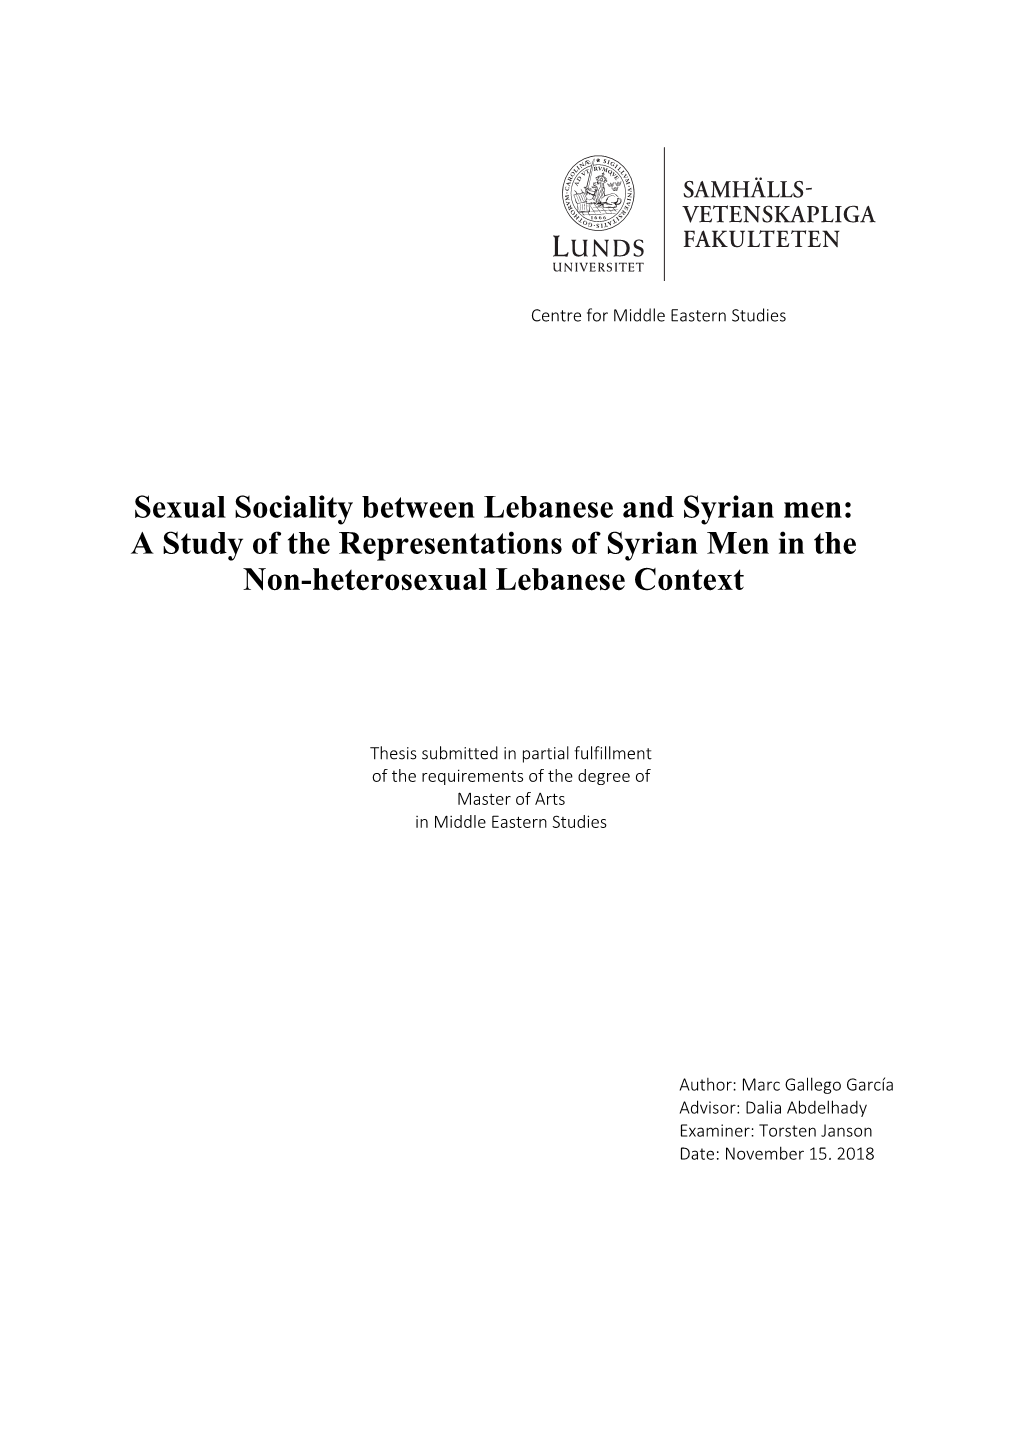 Sexual Sociality Between Lebanese and Syrian Men: a Study of the Representations of Syrian Men in the Non-Heterosexual Lebanese Context